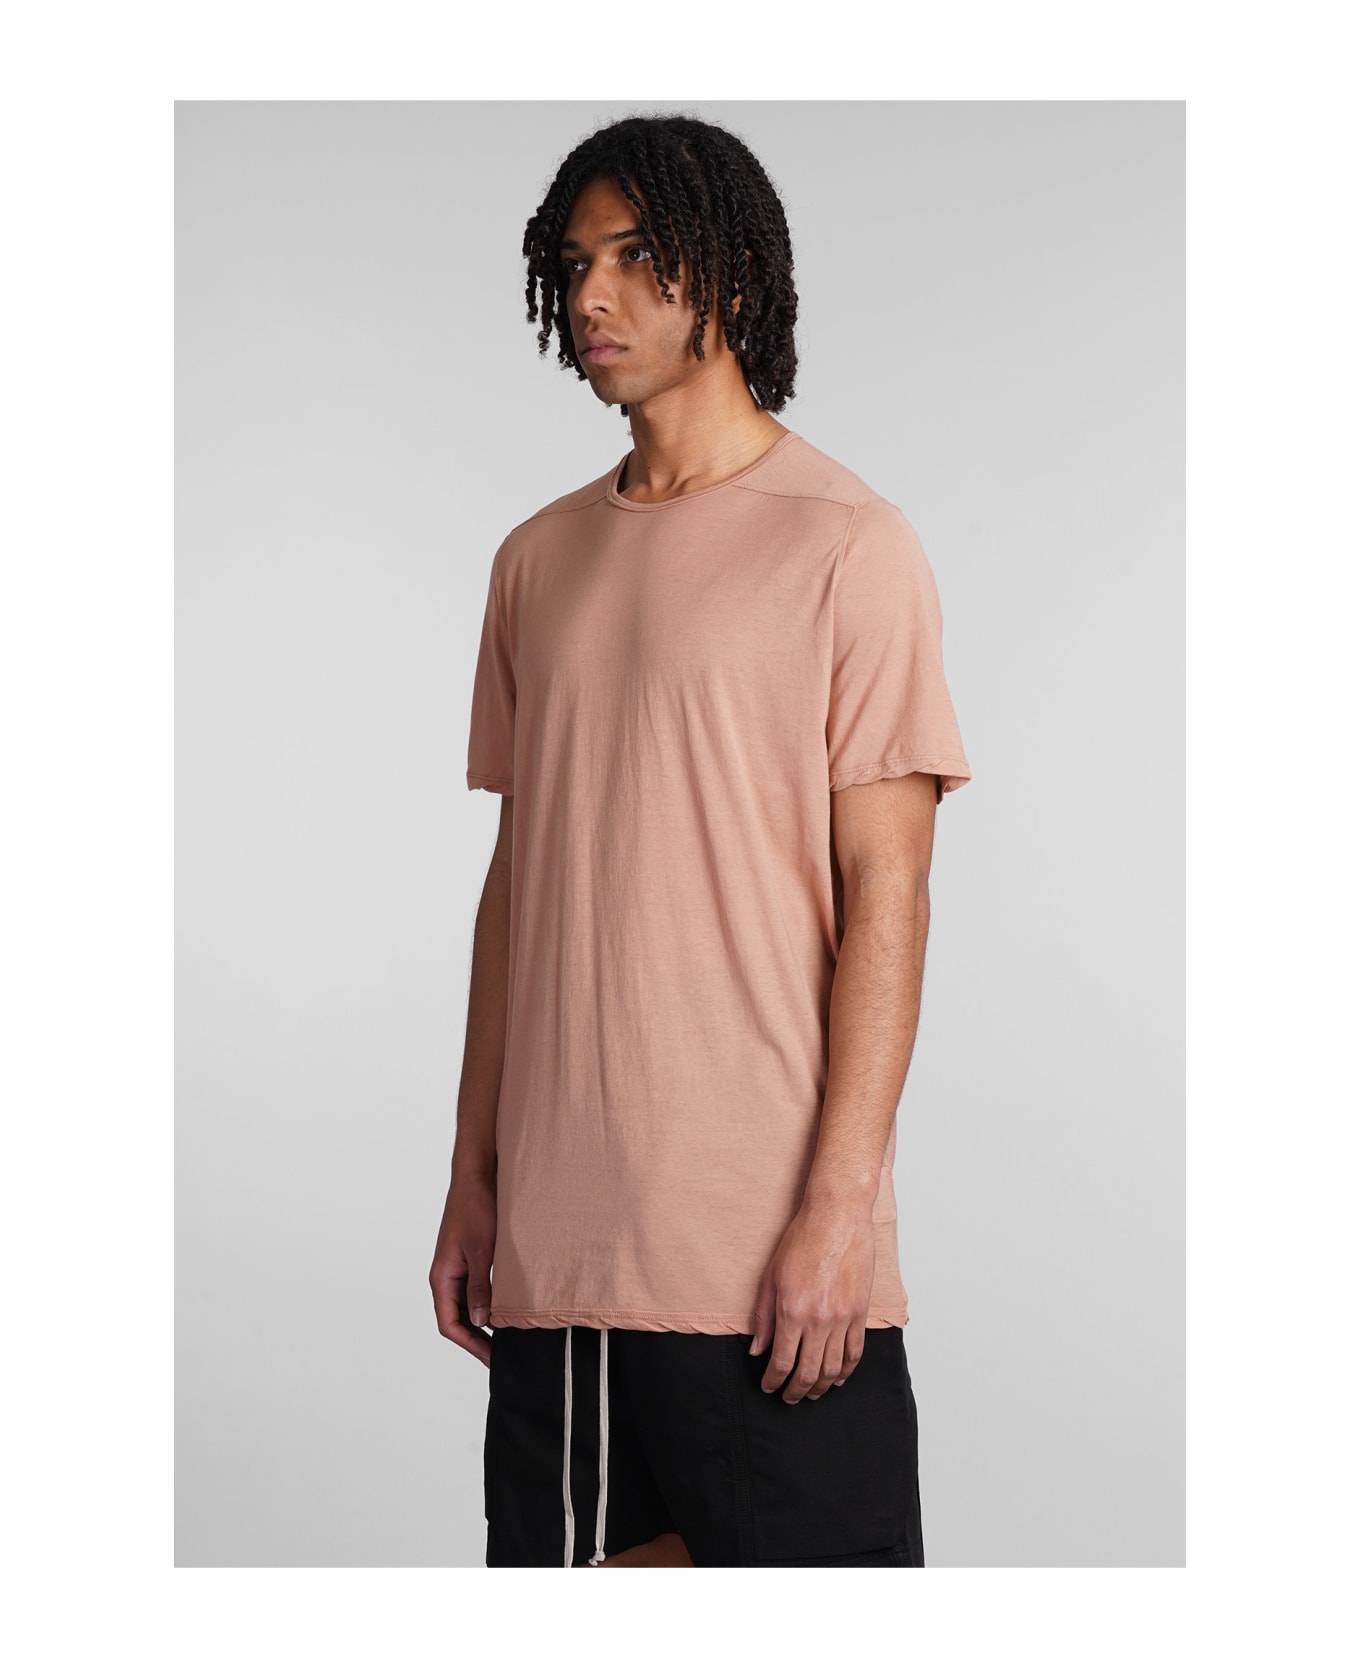 DRKSHDW Level T T-shirt In Rose-pink Cotton - rose-pink シャツ